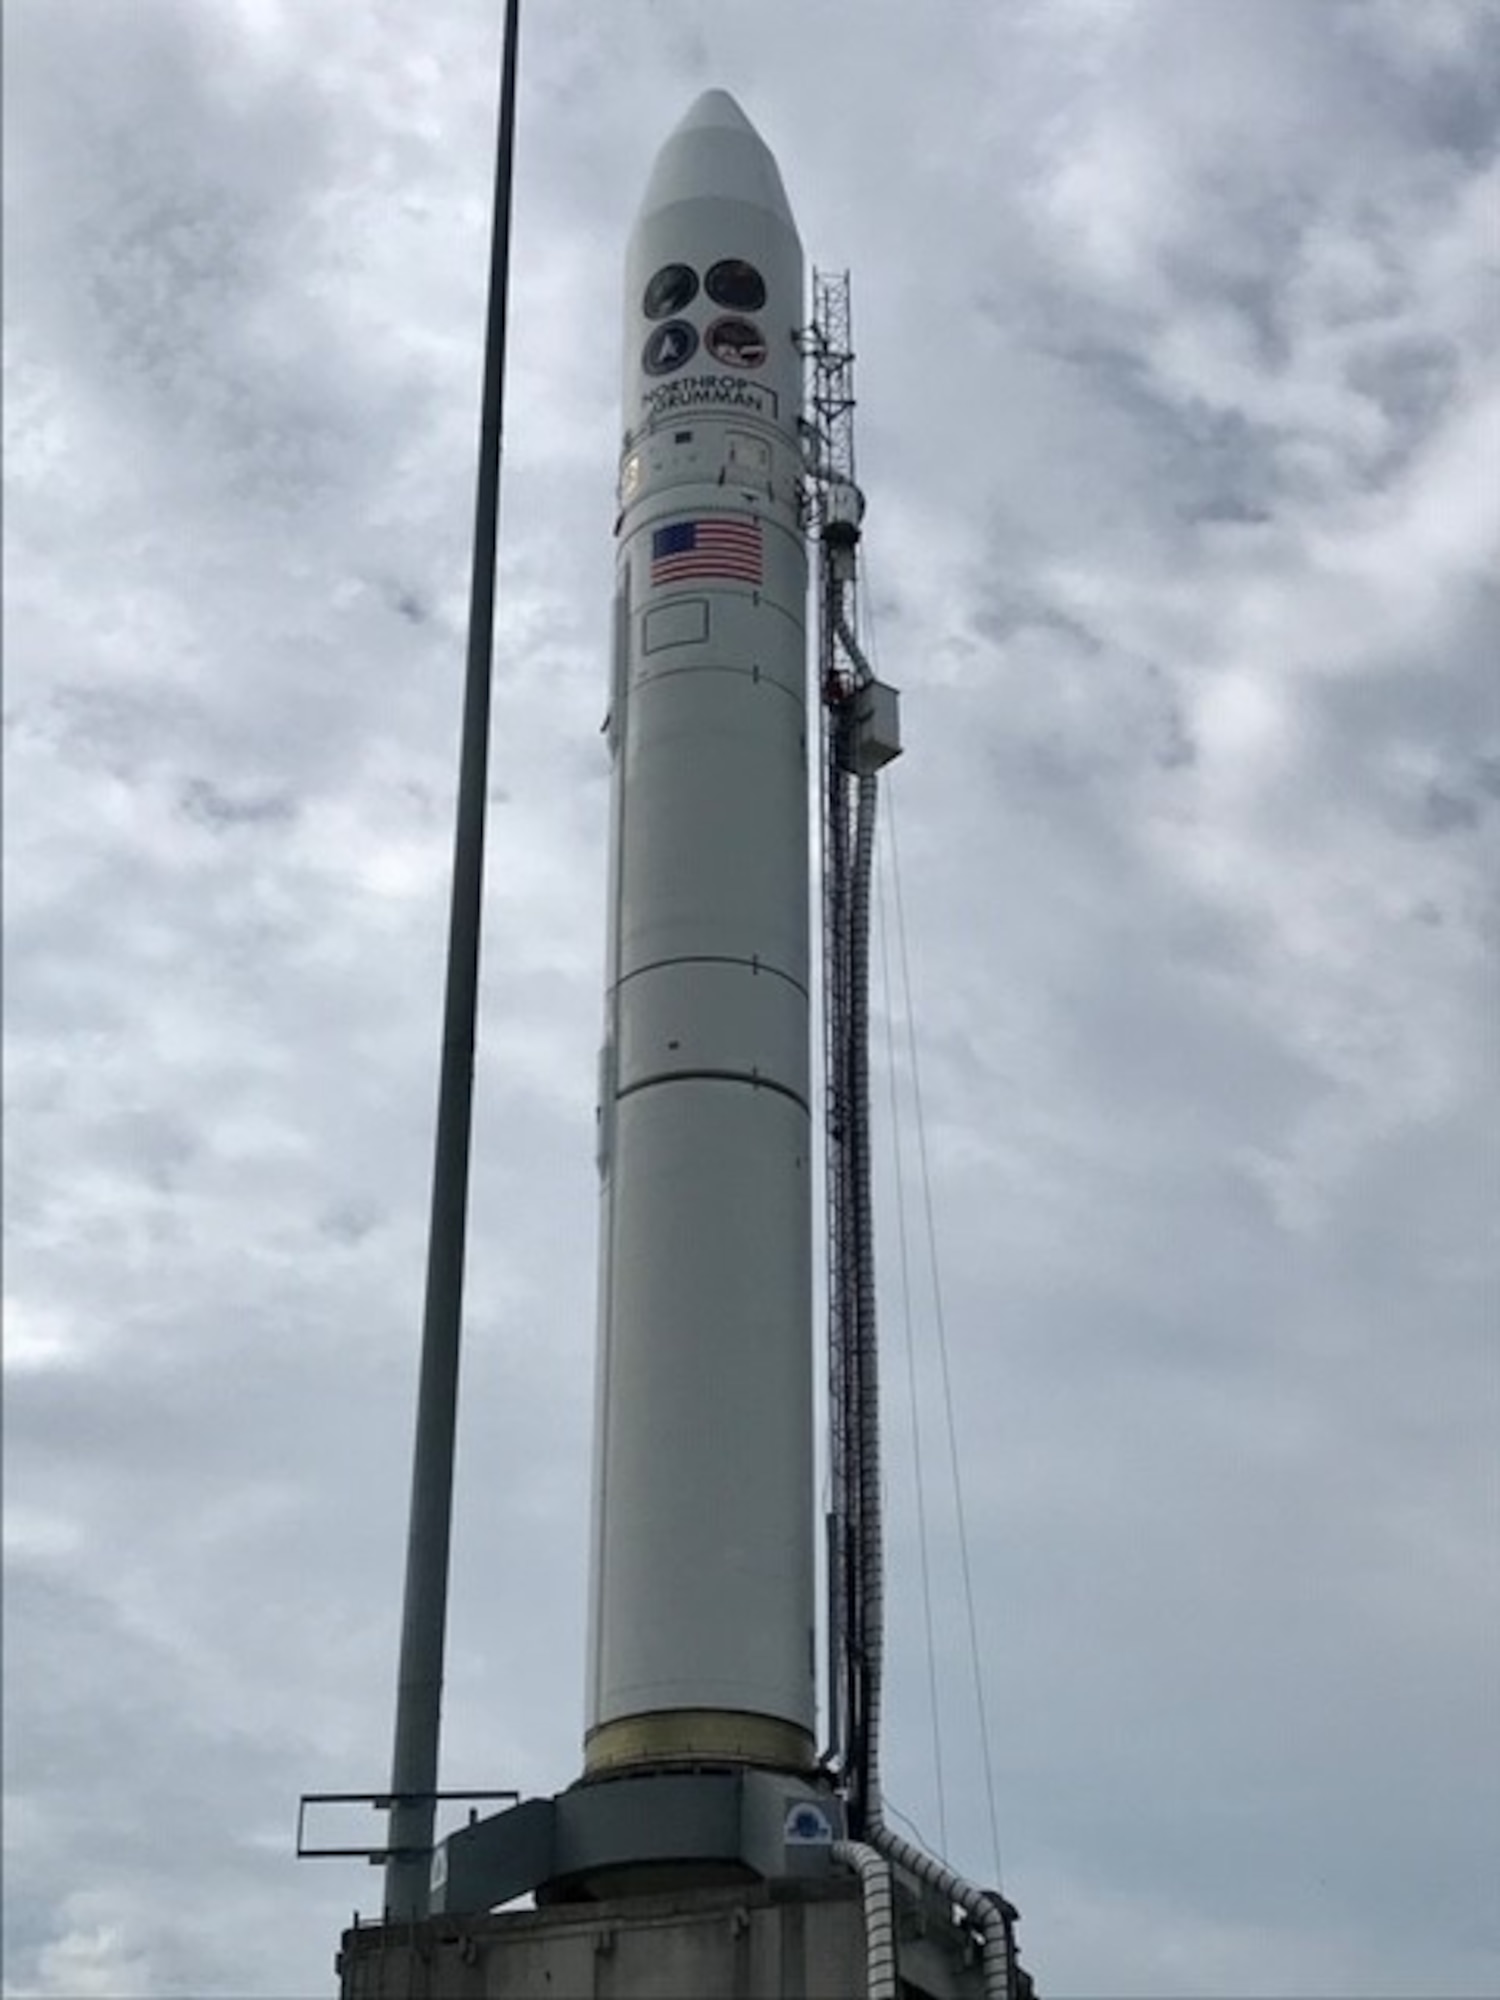 The upcoming National Reconnaissance Office Launch (NROL)-129 mission is scheduled to lift off at 9 a.m. EST (6 a.m. Pacific) July 15 from the Mid-Atlantic Regional Spaceport’s Pad 0B at NASA’s Wallops Flight Facility in Virginia.